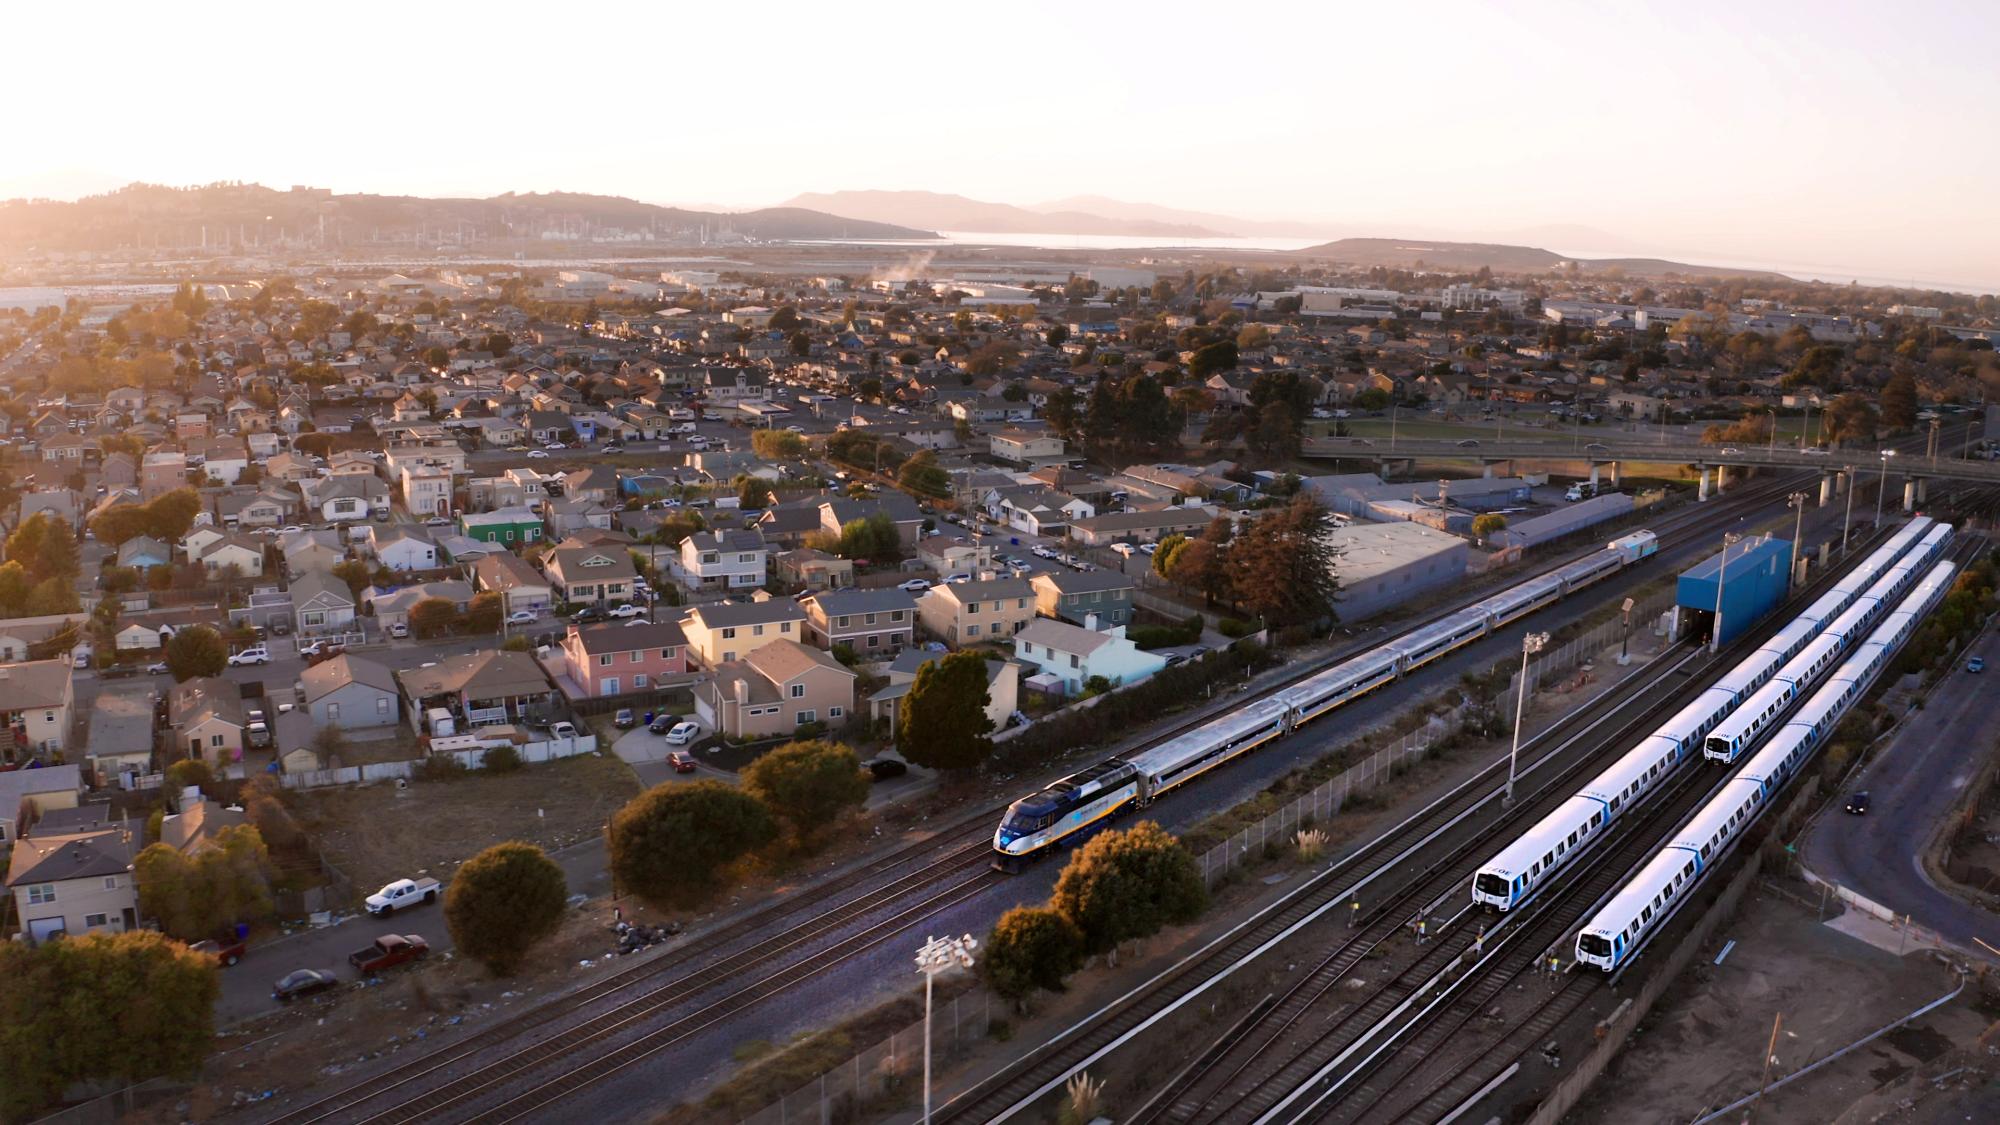 An aerial view in Richmond, California captures a sprawling residential neighborhood adjacent to the right-of-way for Capitol Corridor and BART service with multiple trains on the tracks.